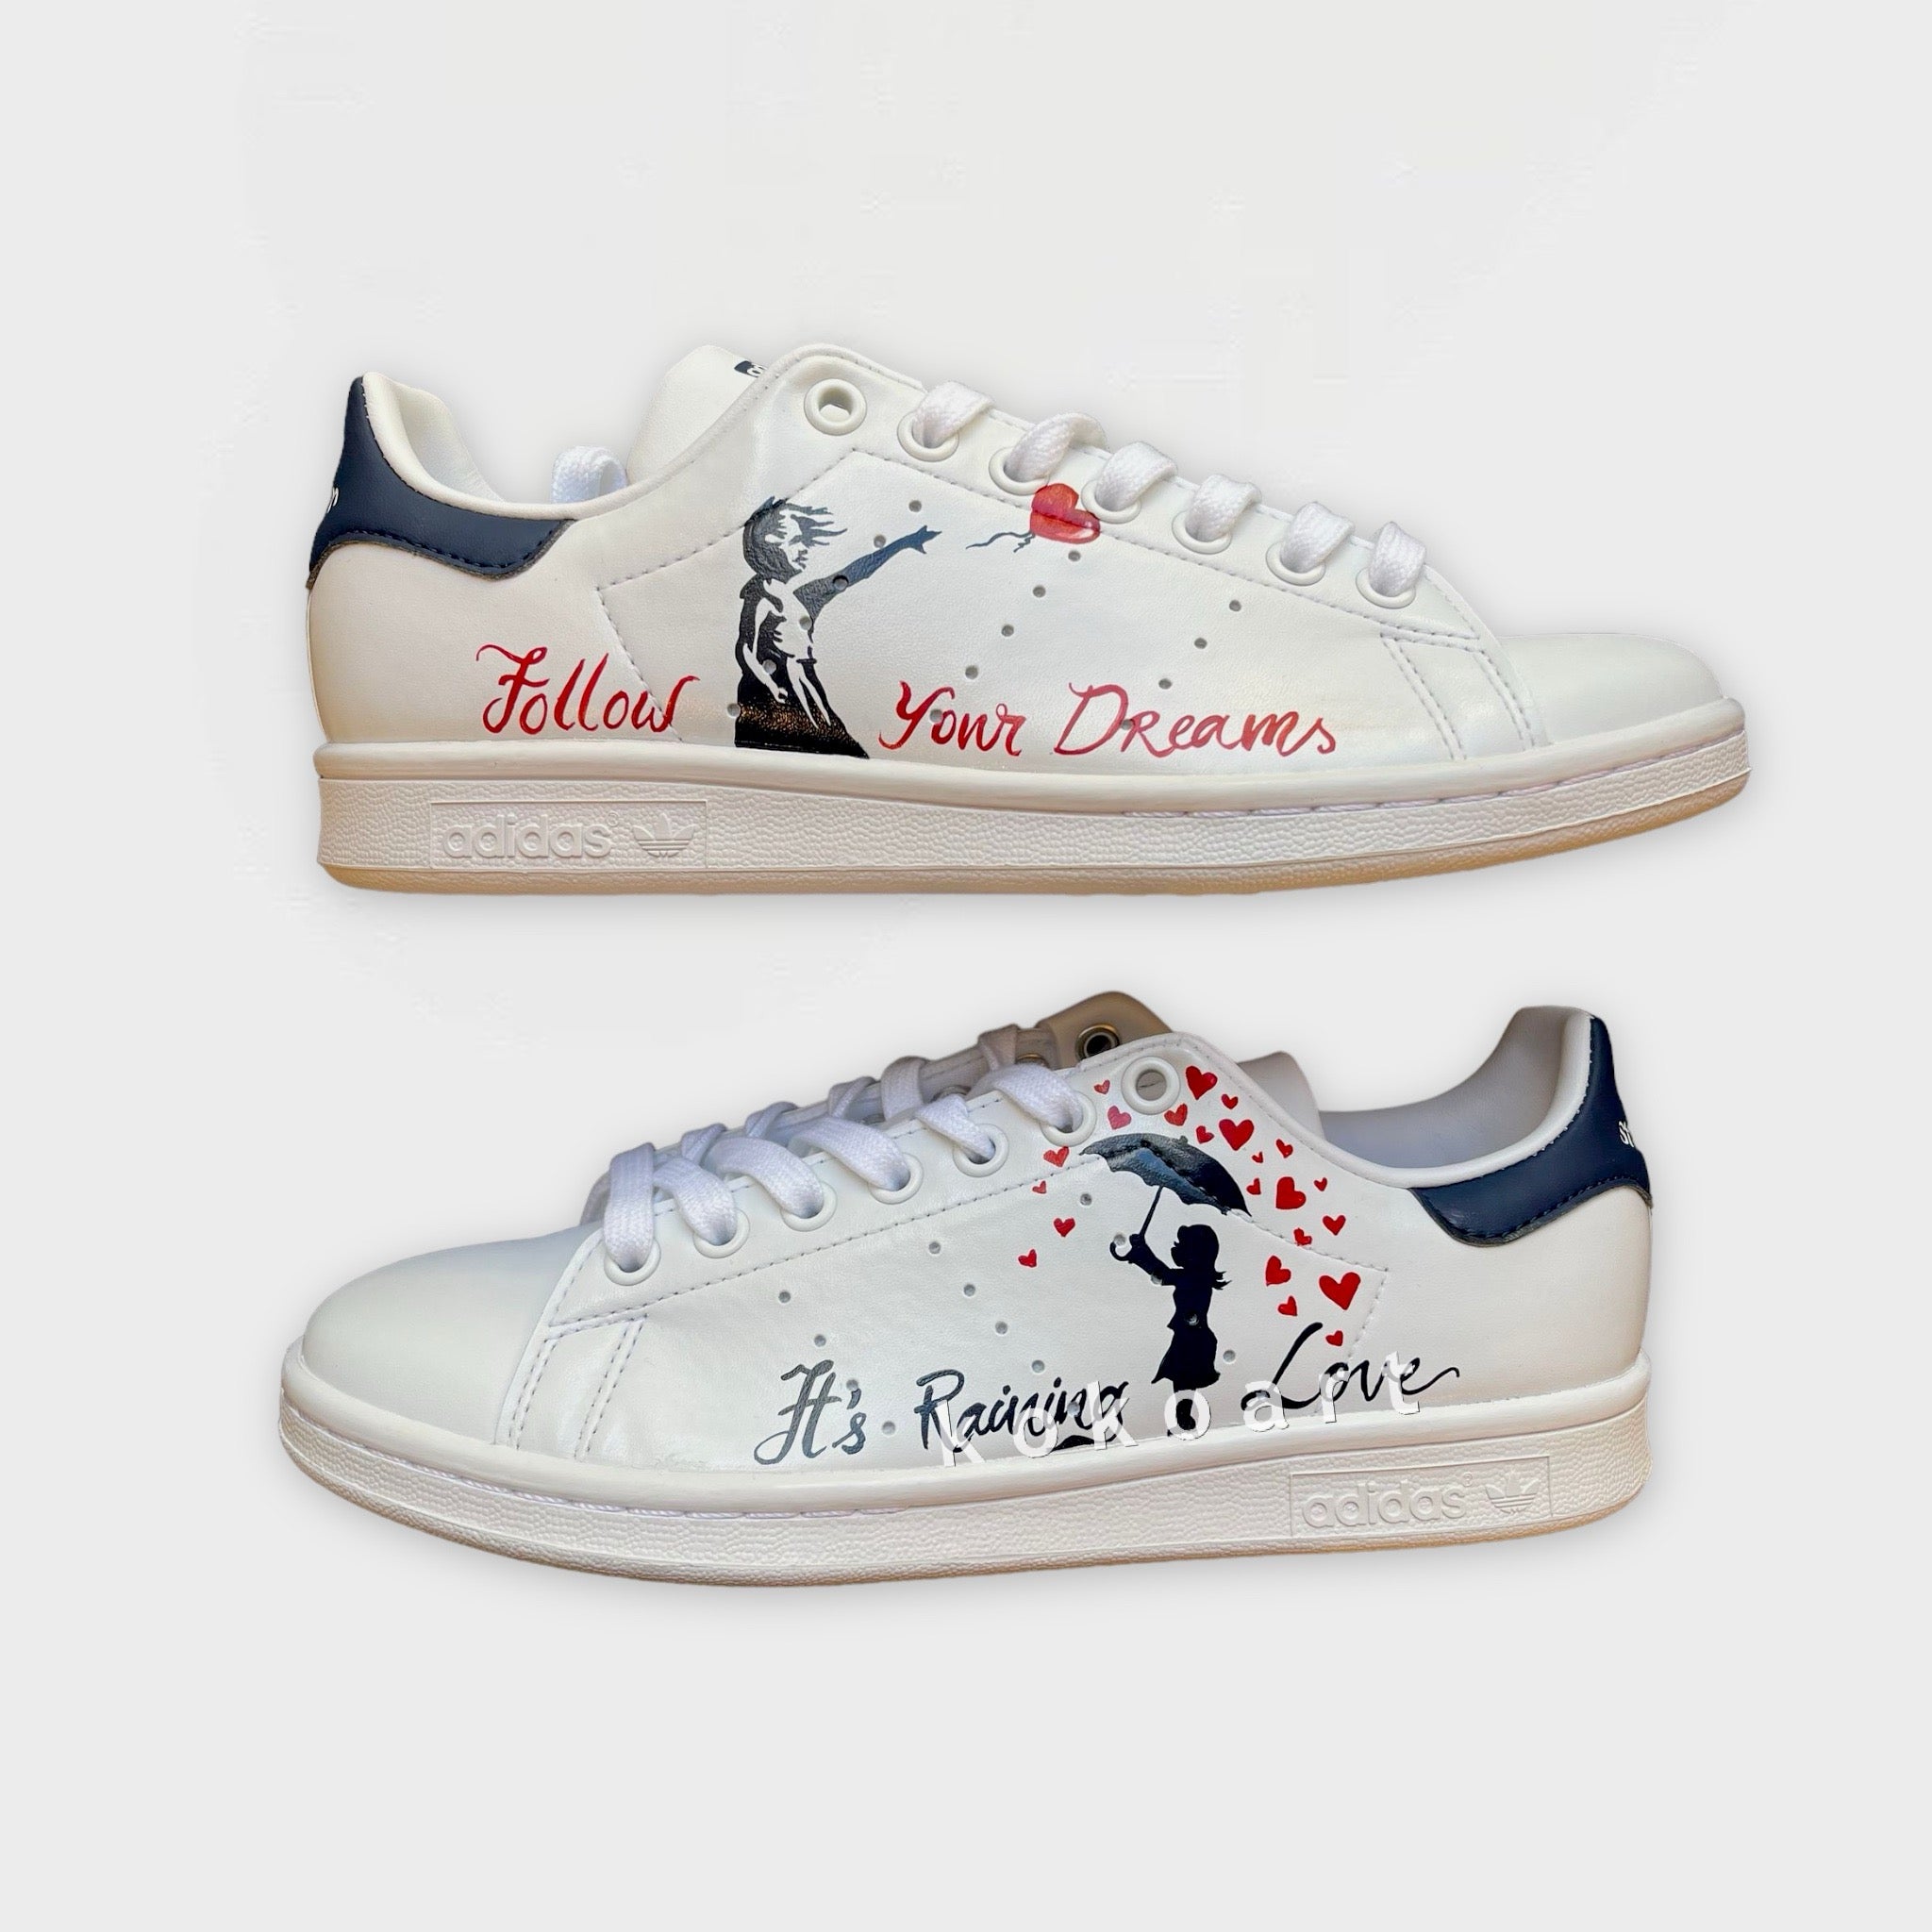 Stan Smith Hand Painted Banksy